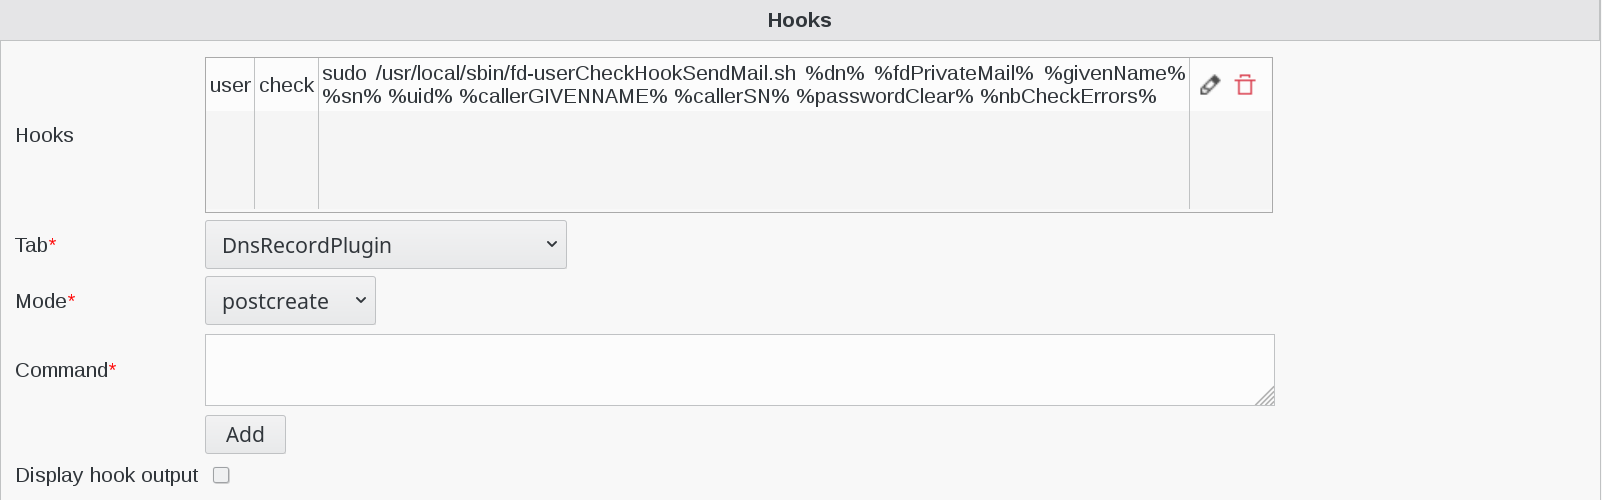 Picture of Hooks settings in FusionDirectory